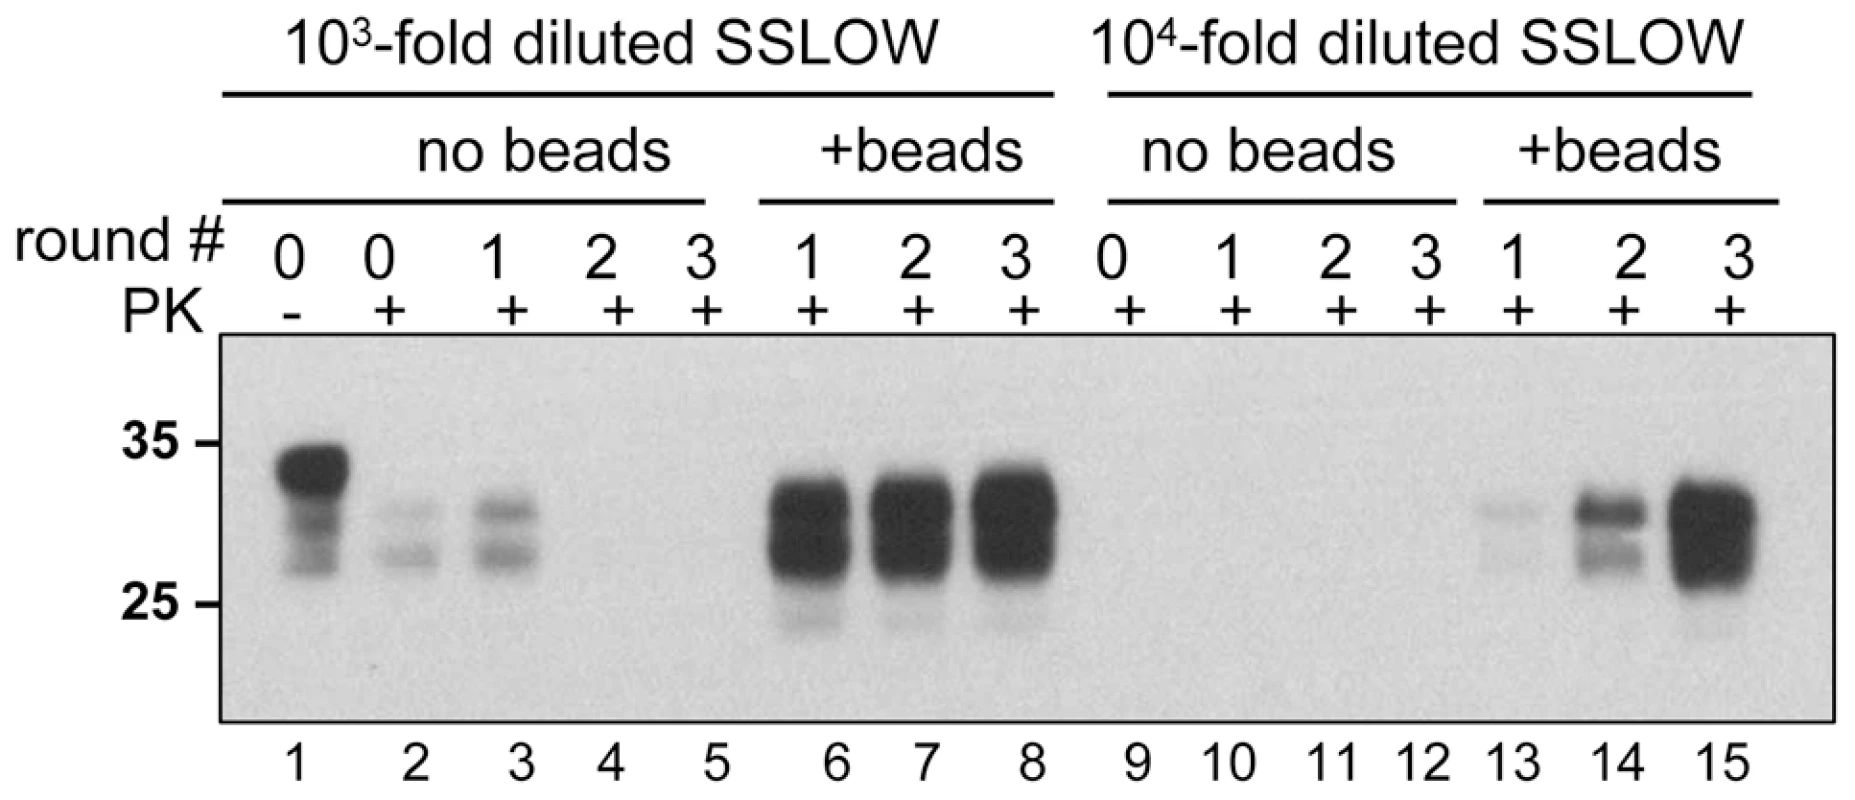 Beads improve the amplification efficiency of SSLOW.